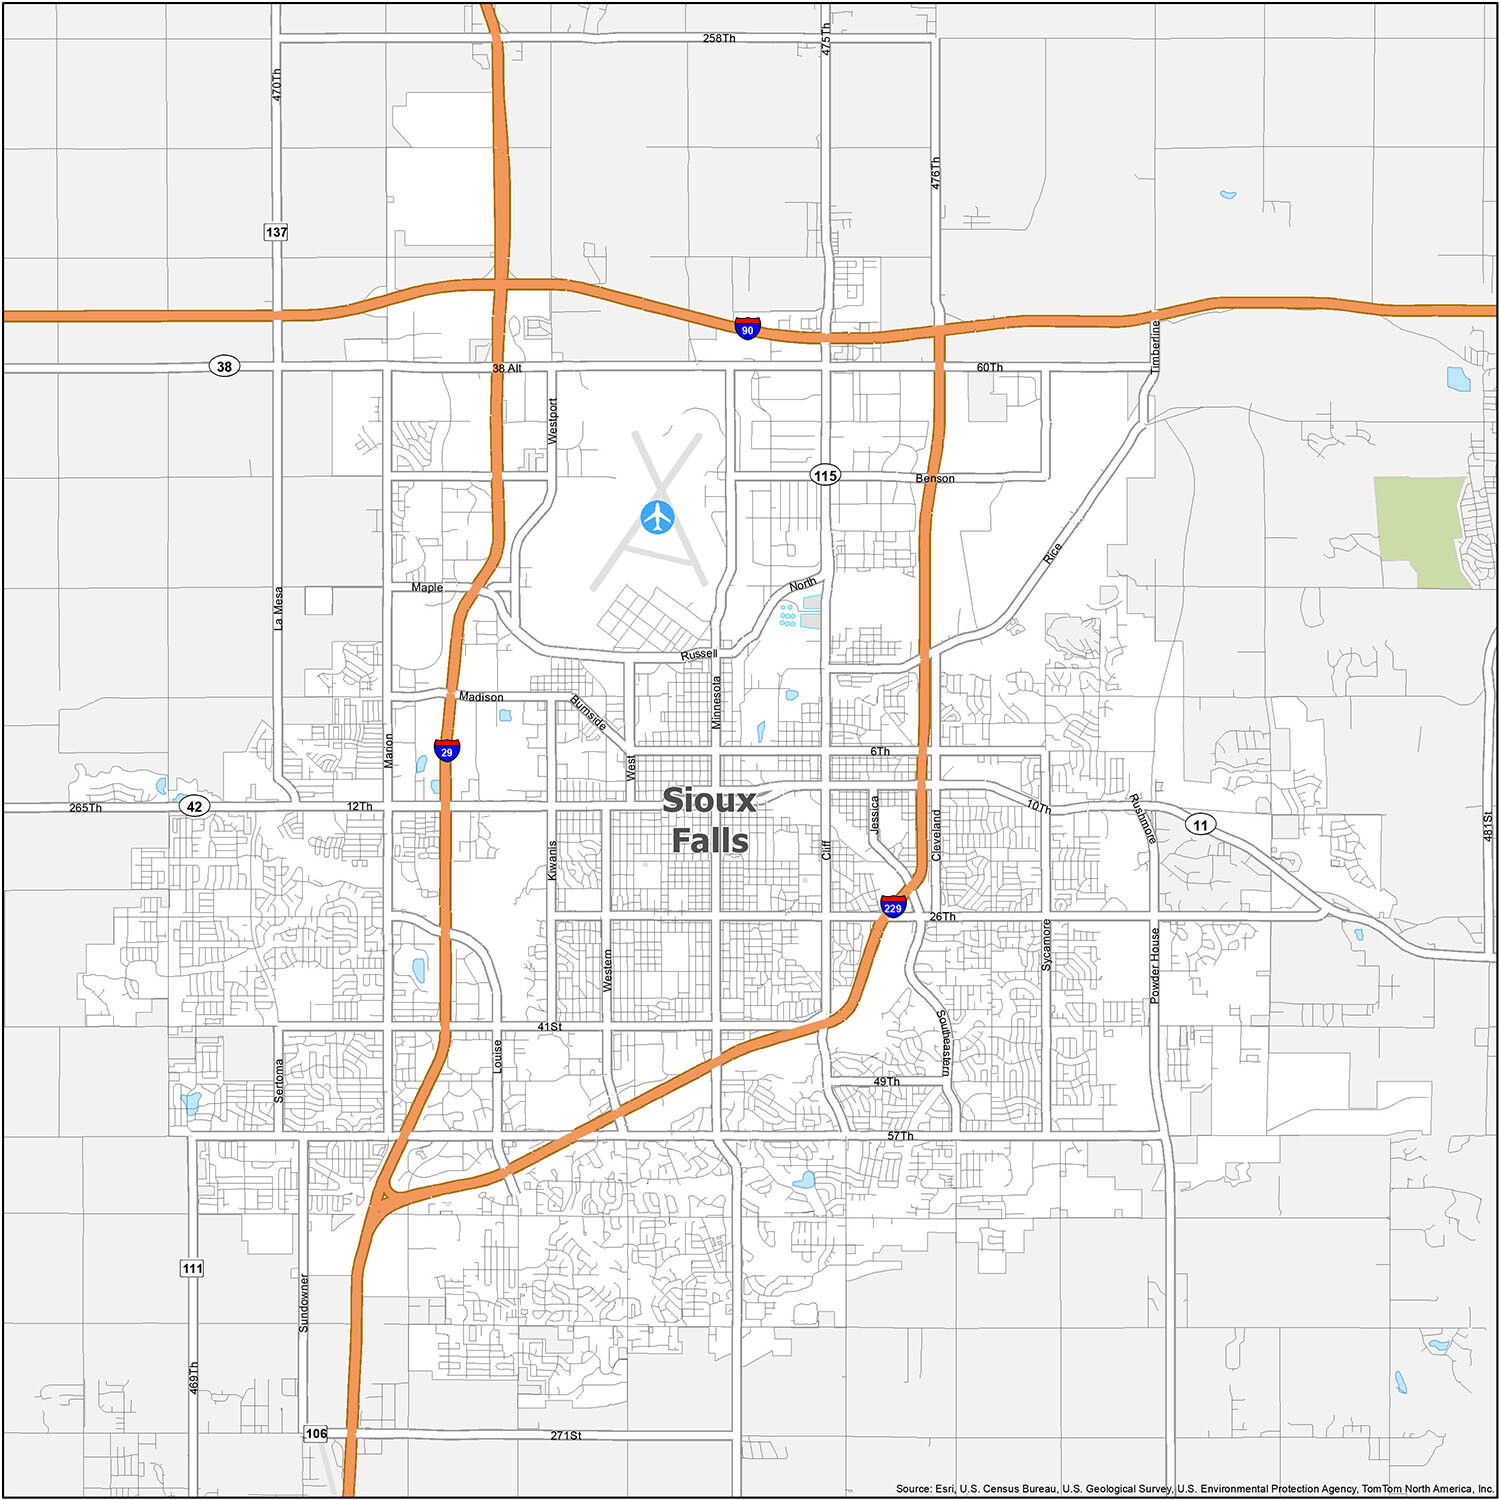 Map Of Sioux Falls And Surrounding Towns Map Of Sioux Falls, South Dakota - Gis Geography